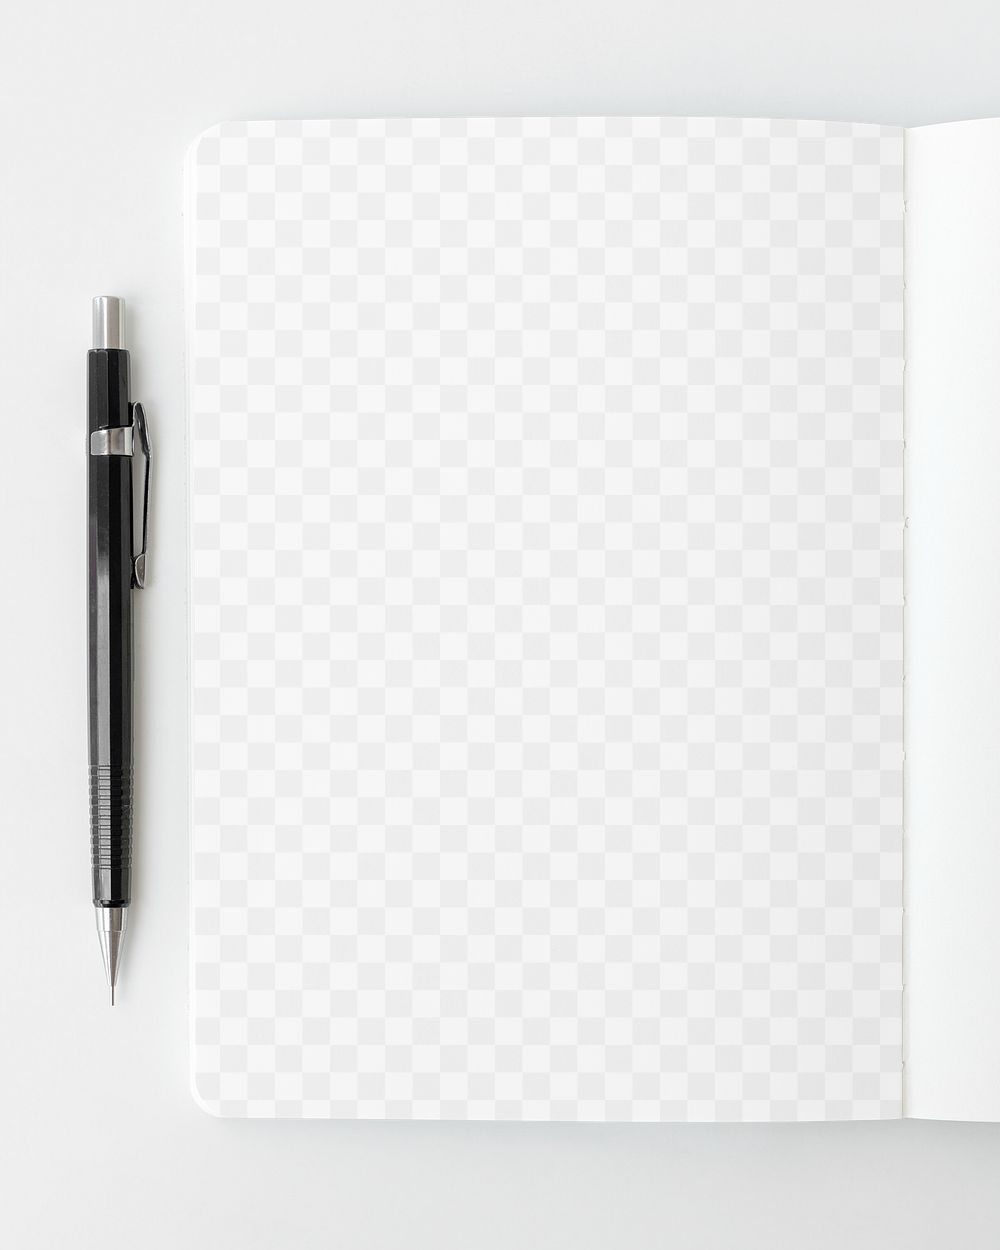 Blank plain white notebook page with a pencil